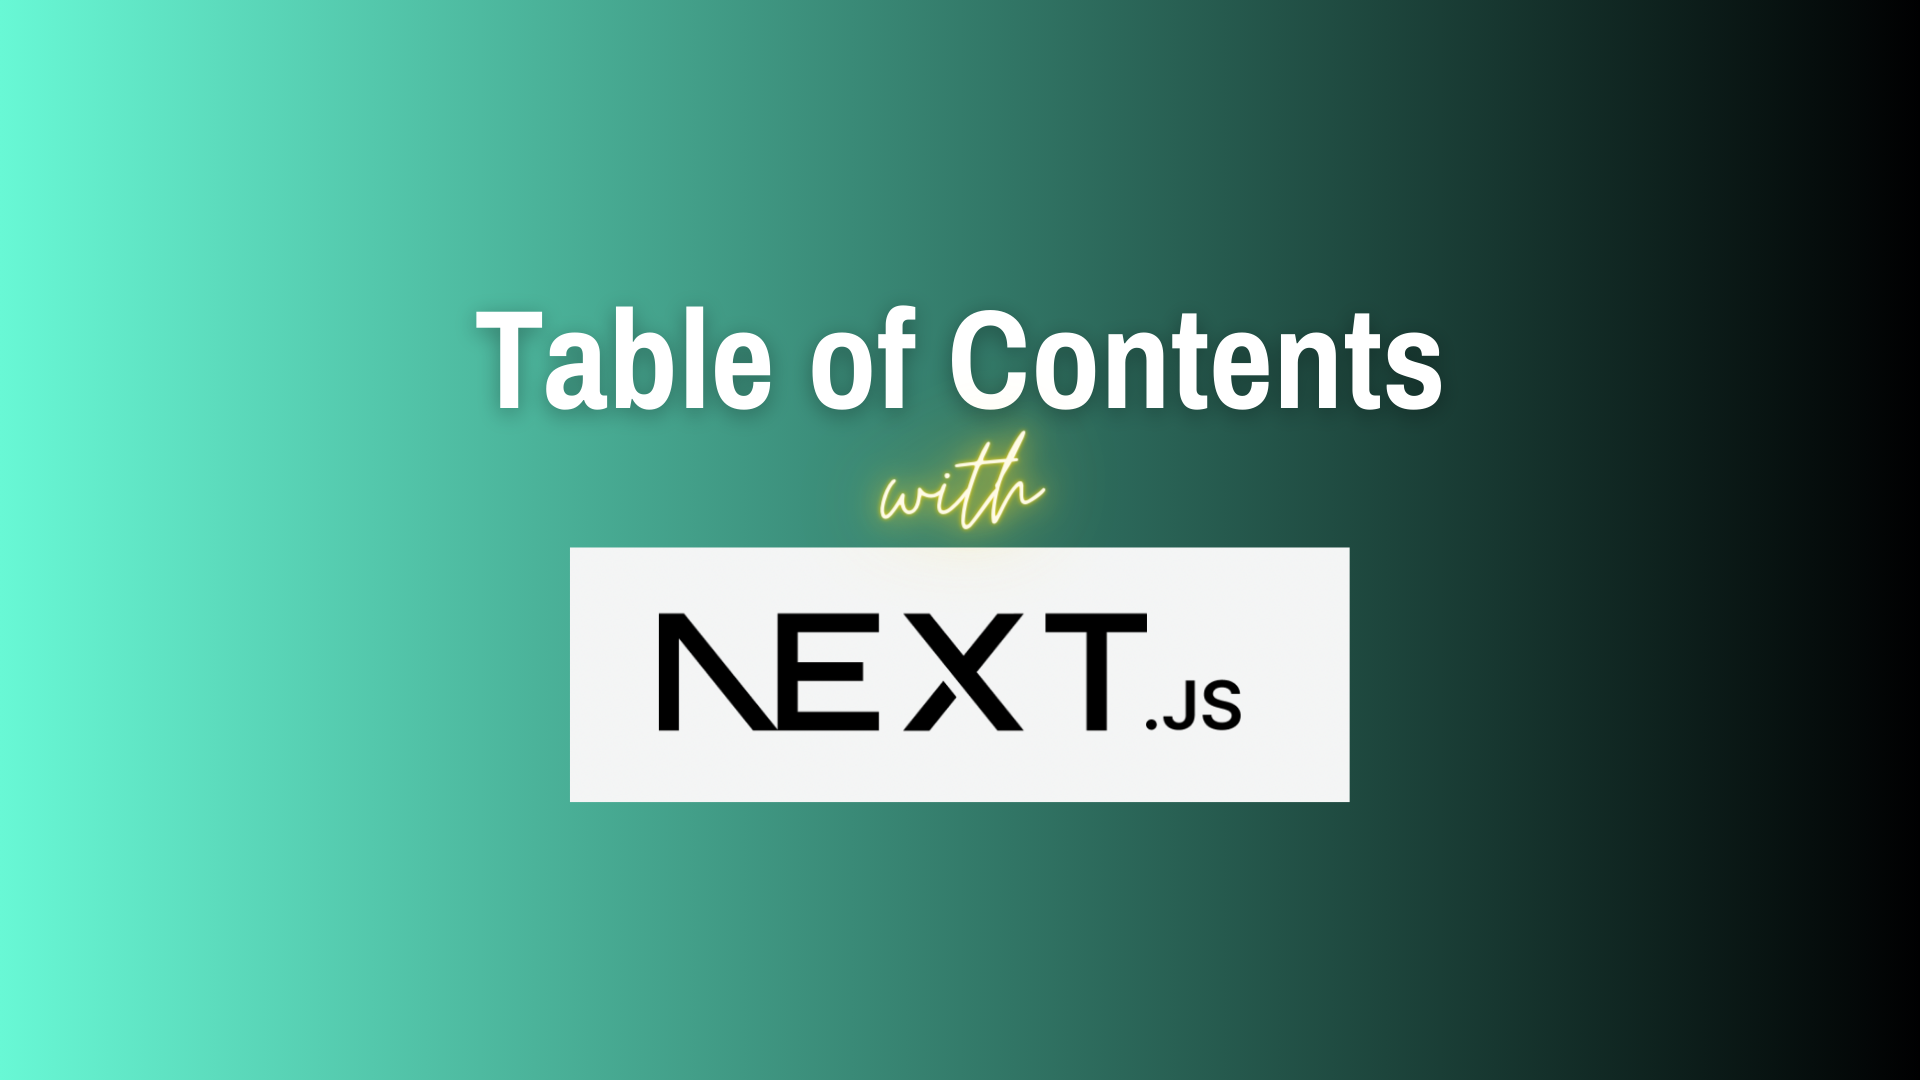 Table of Contents wth Next.js on a blended green and black background